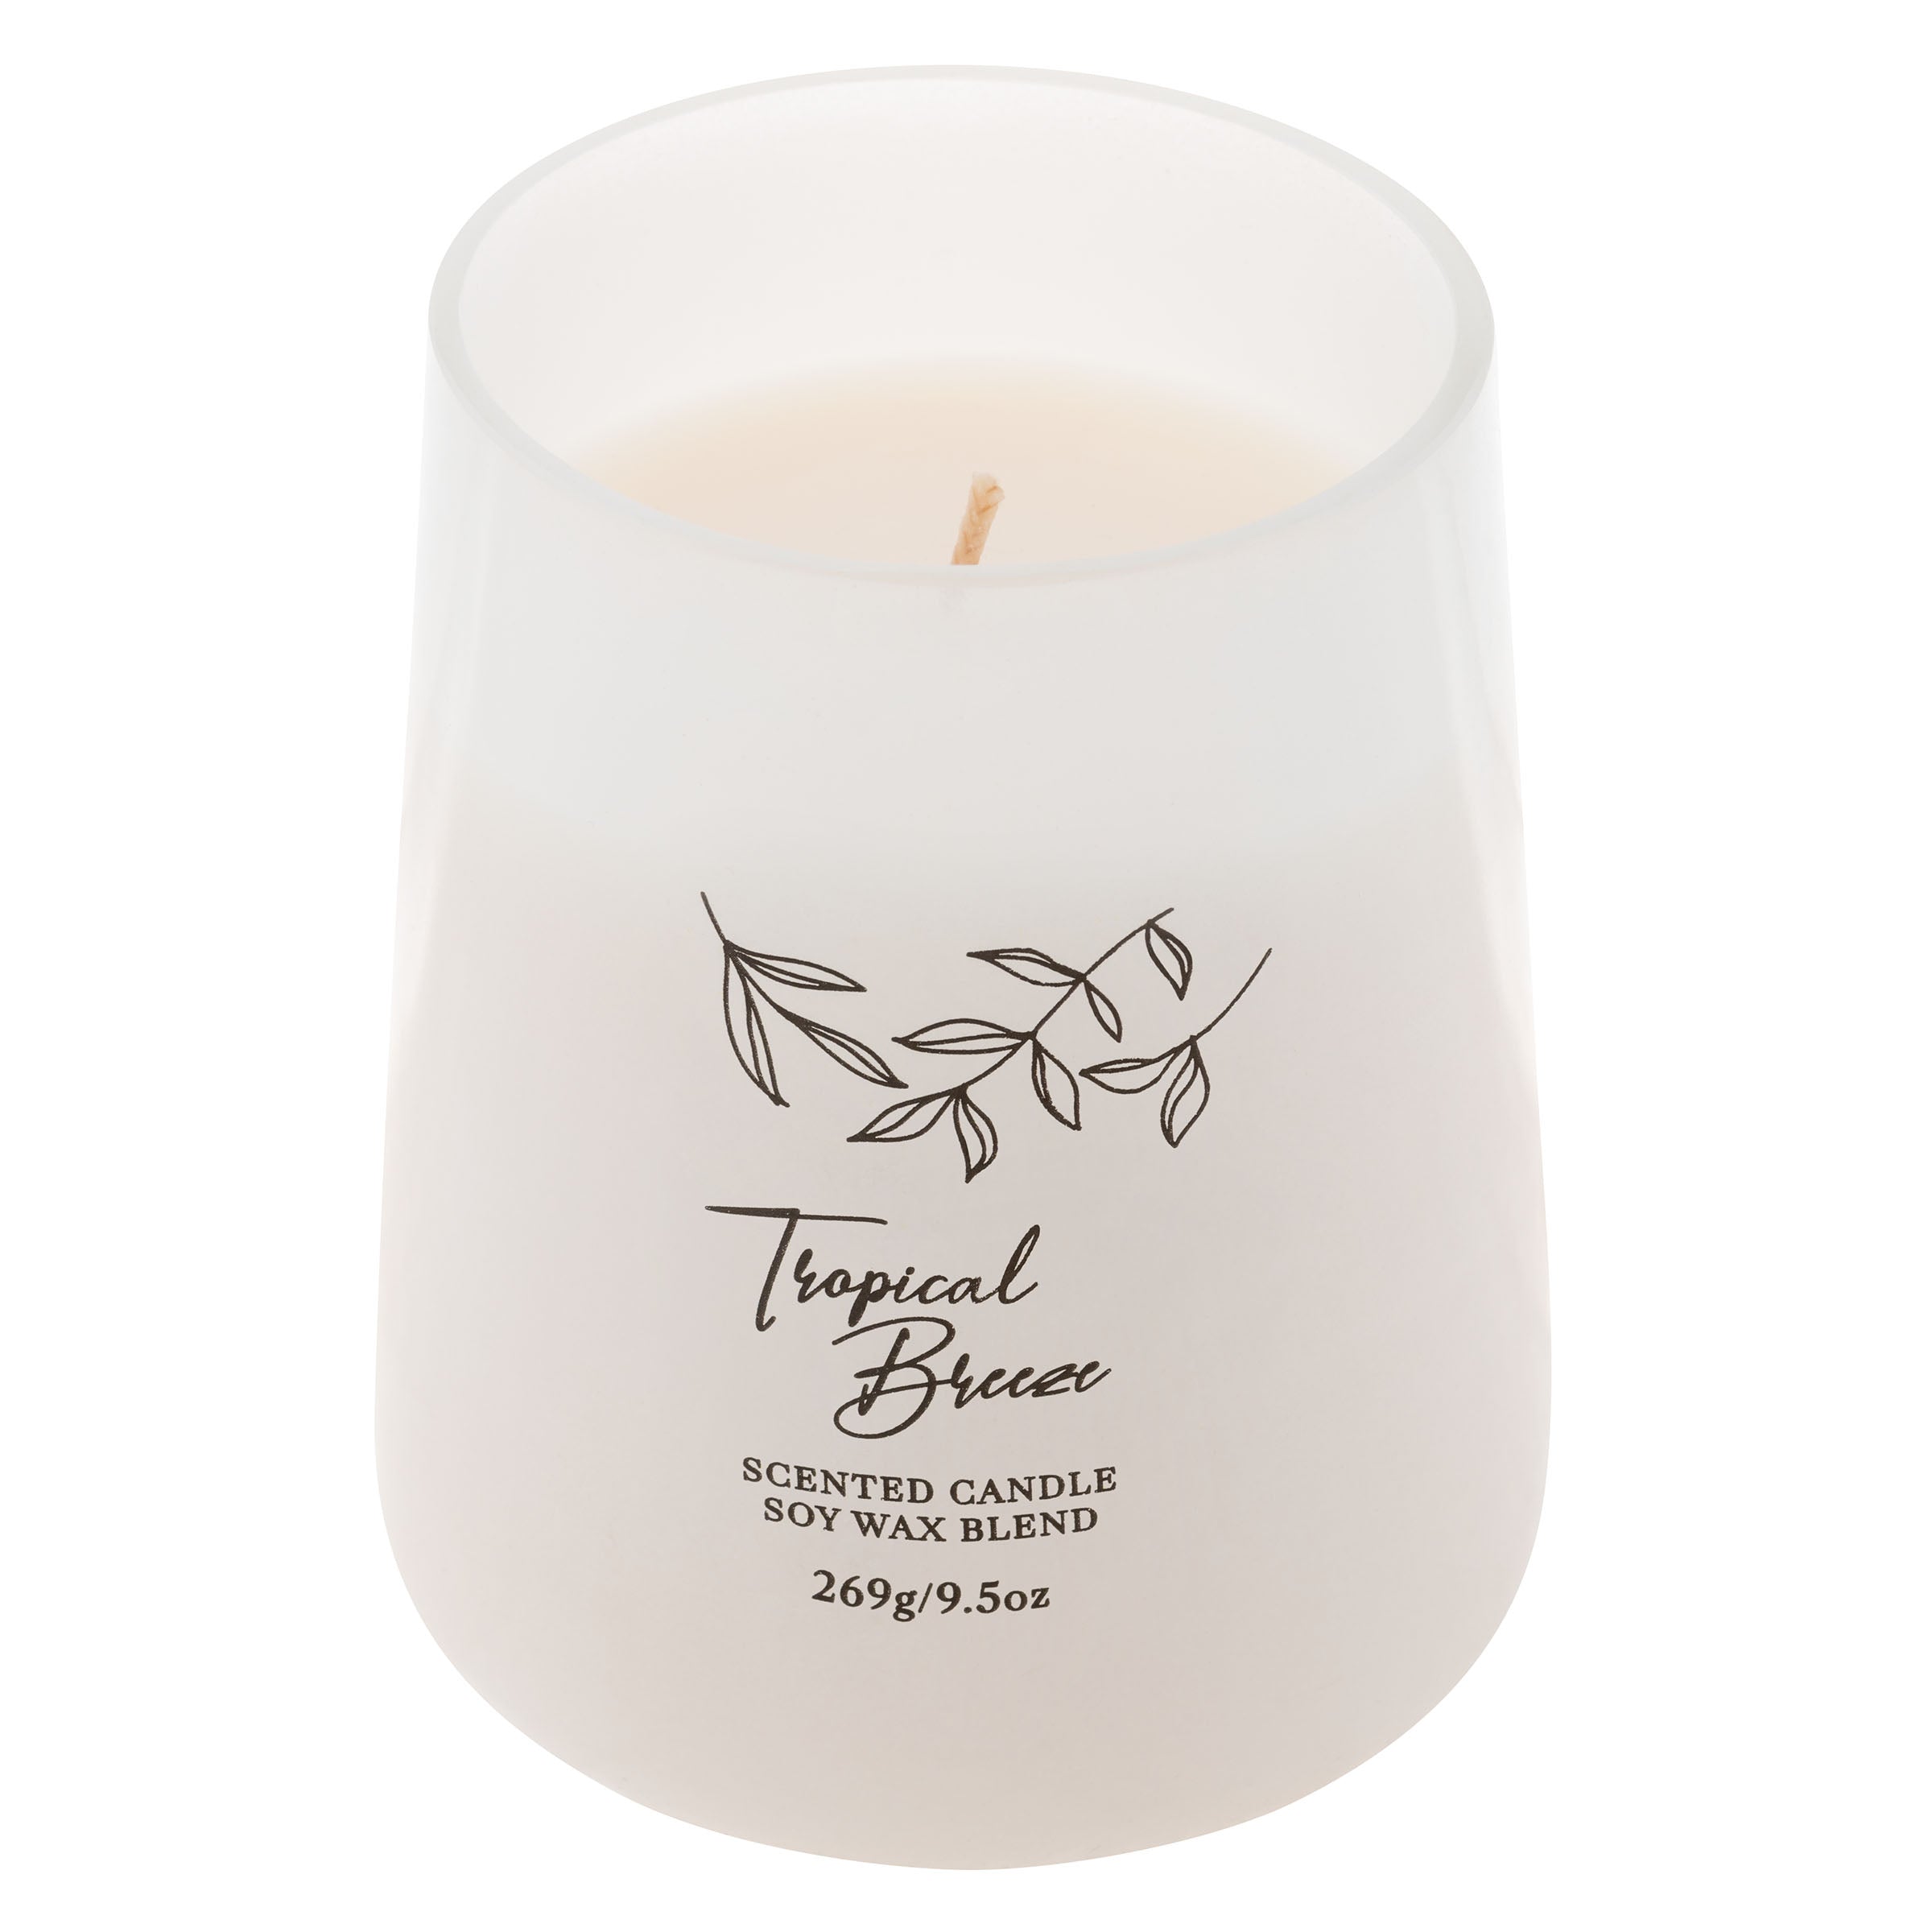 Karma Clean Burning Soy Candle 